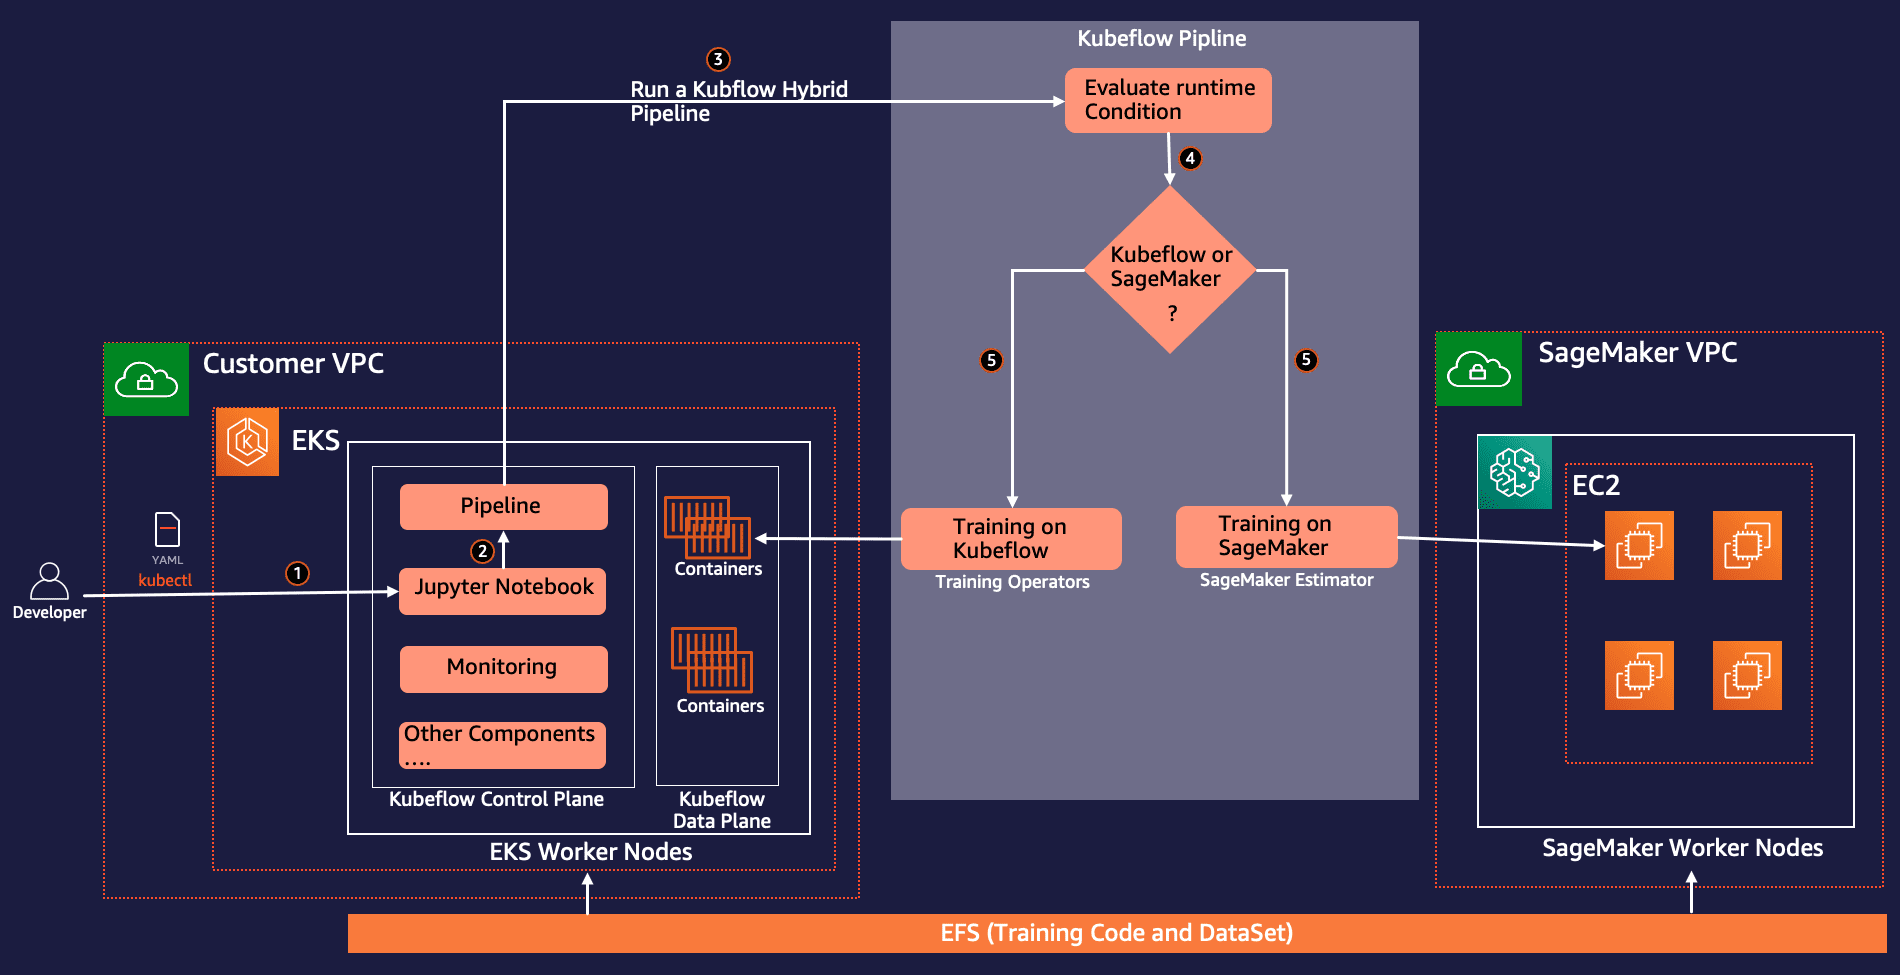 Solution overview